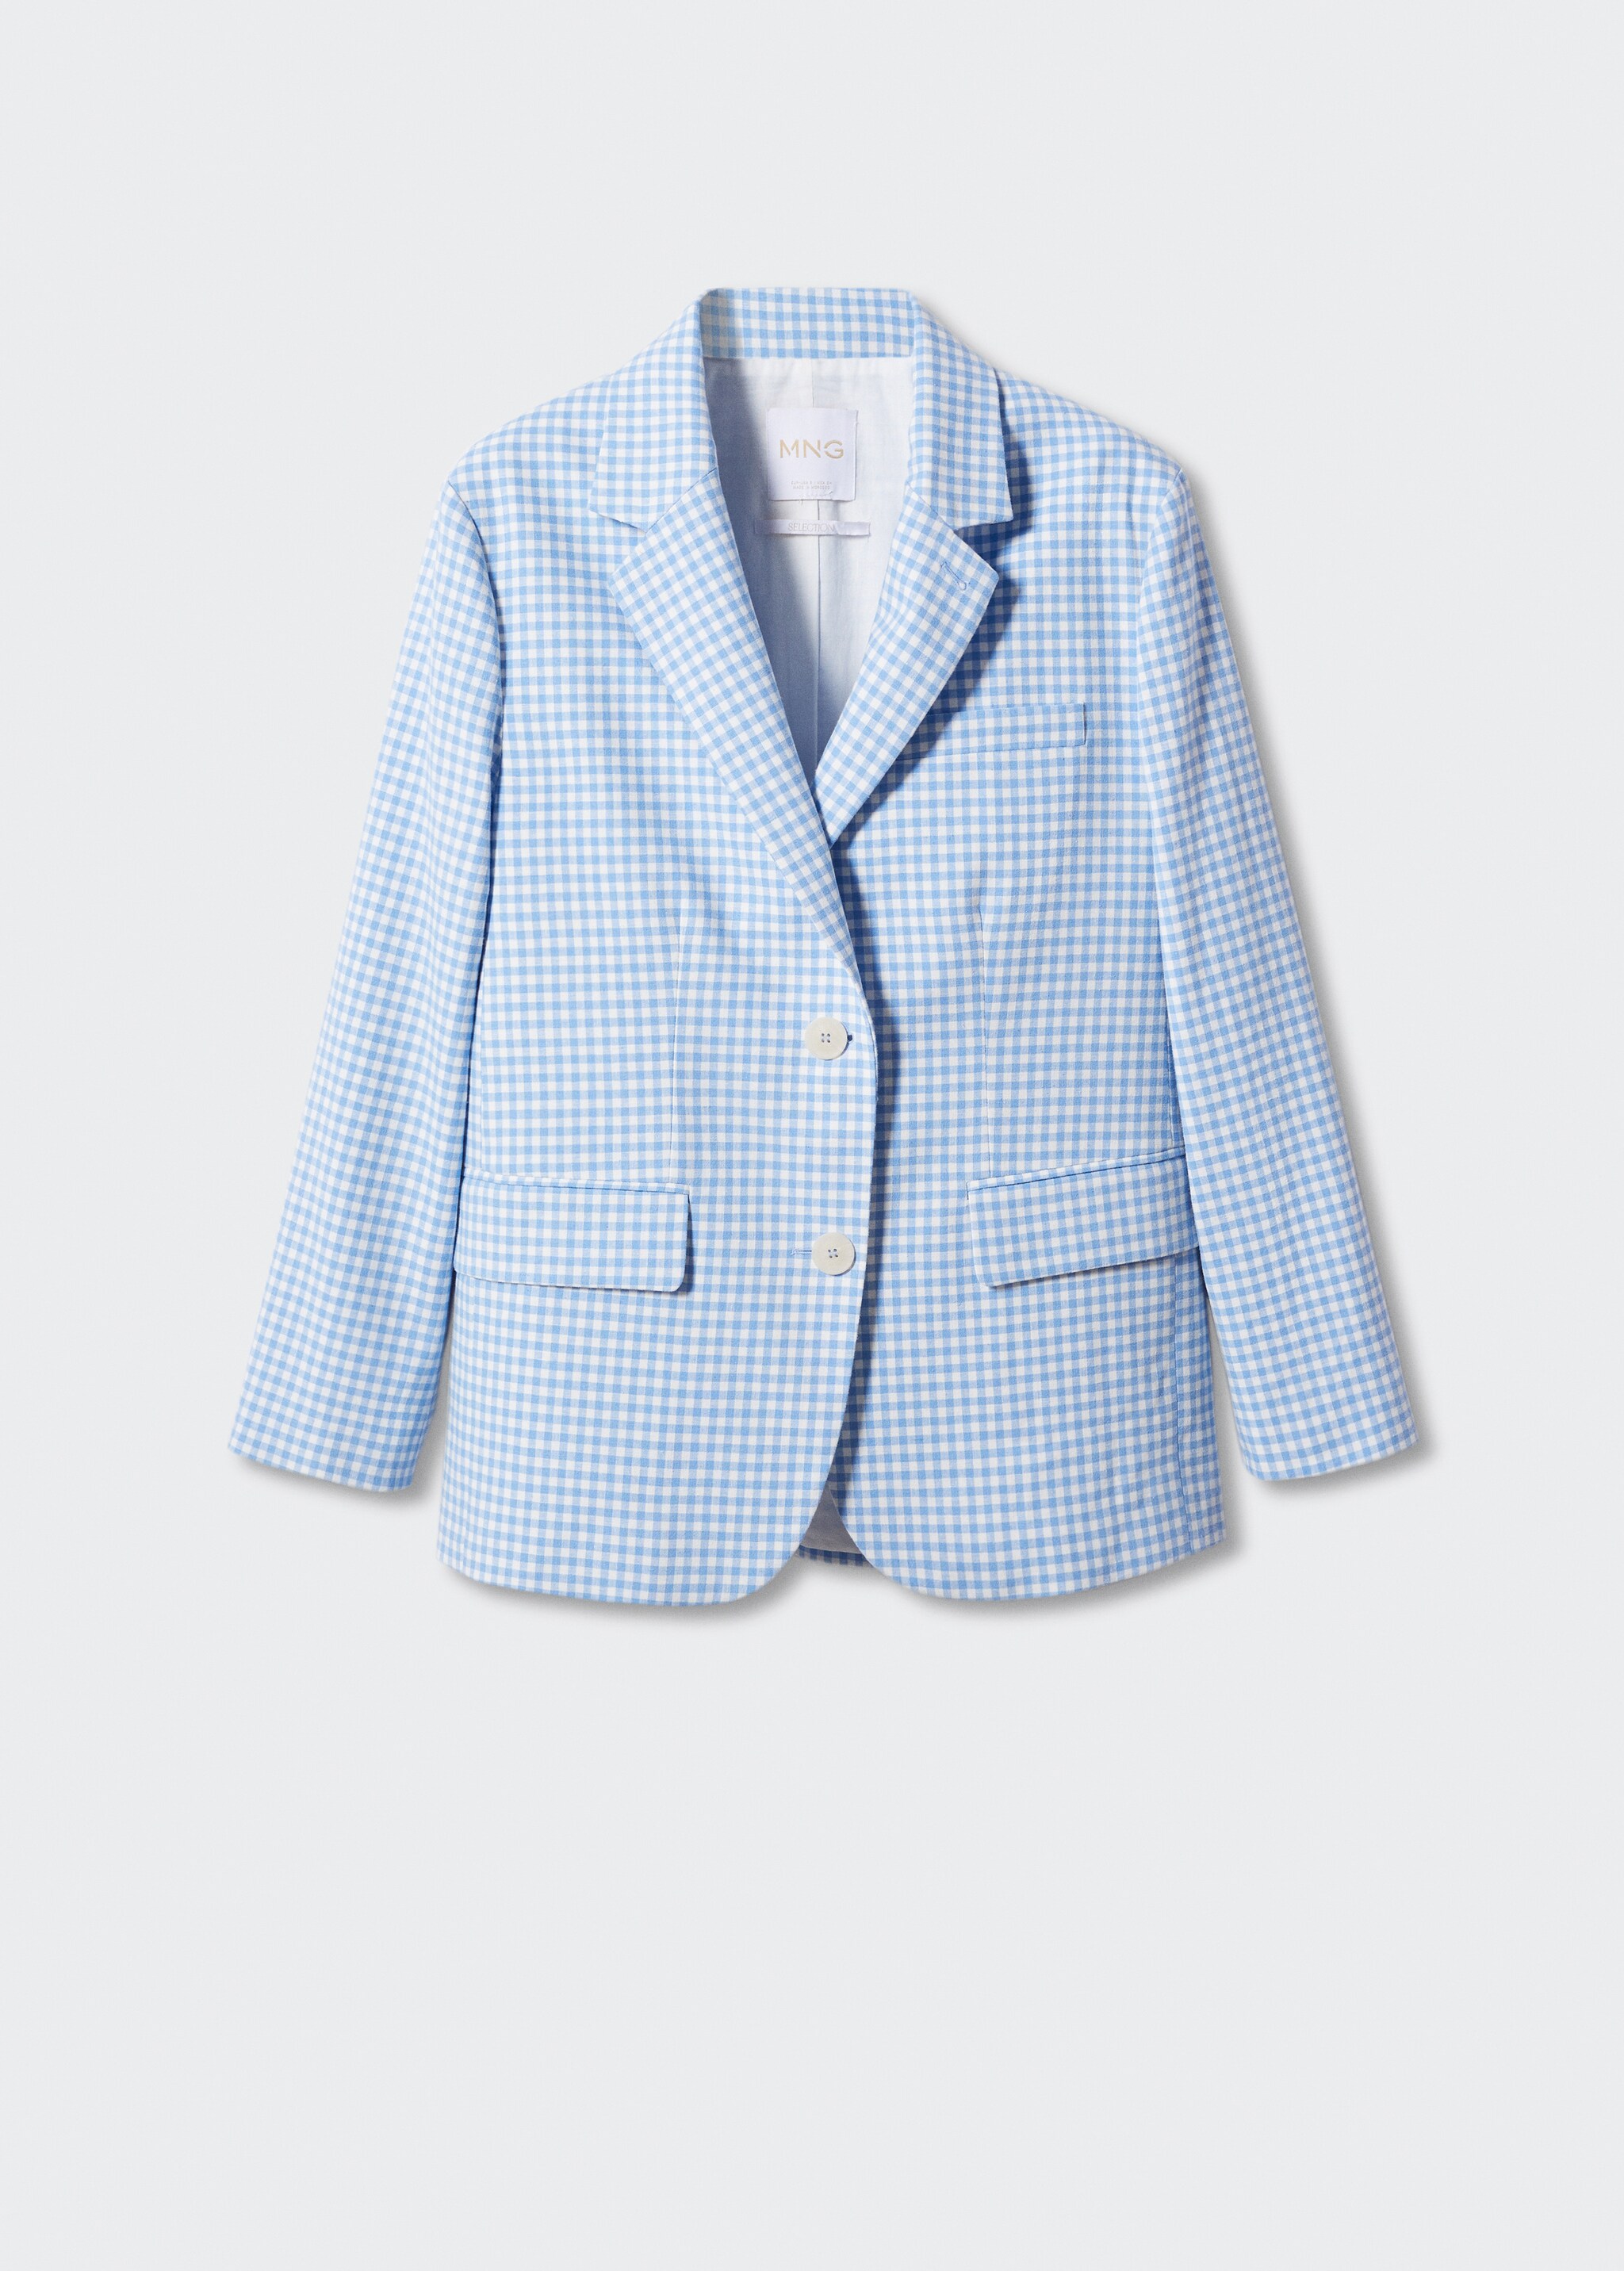 Gingham blazer - Article without model